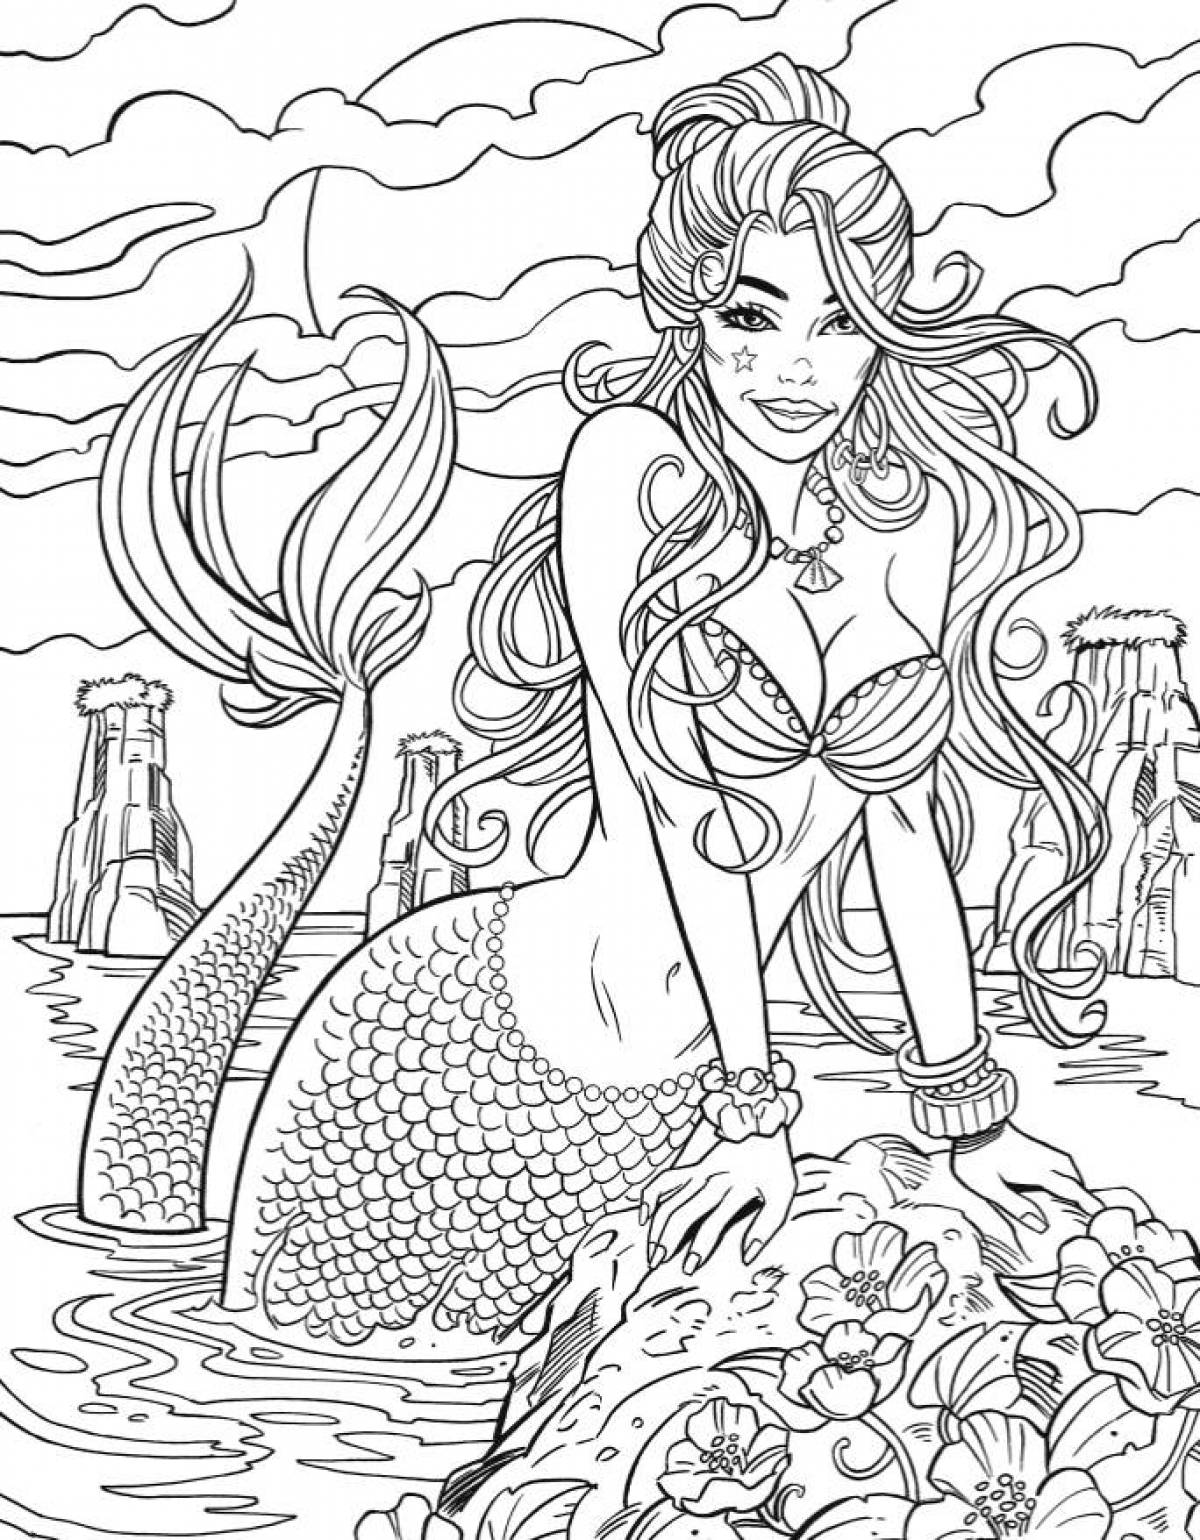 Dazzling mermaid coloring book for girls